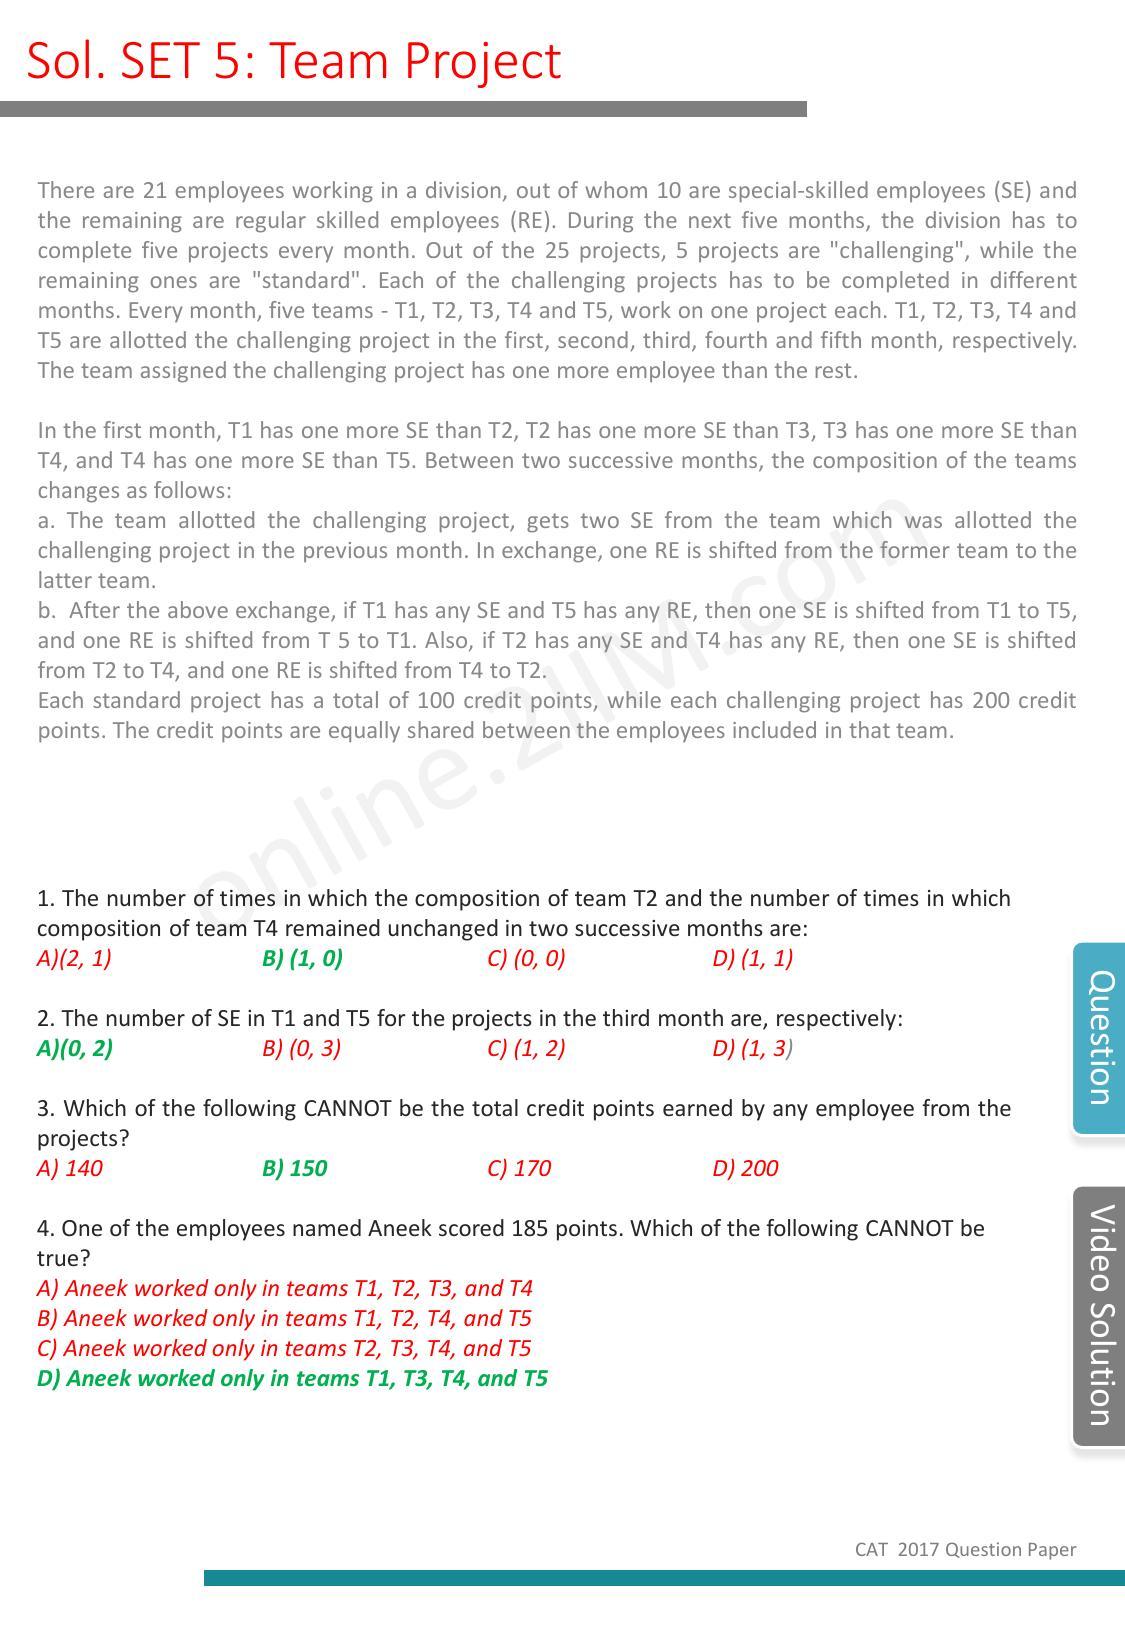 CAT 2017 CAT DILR Slot 1 Question Paper - Page 14